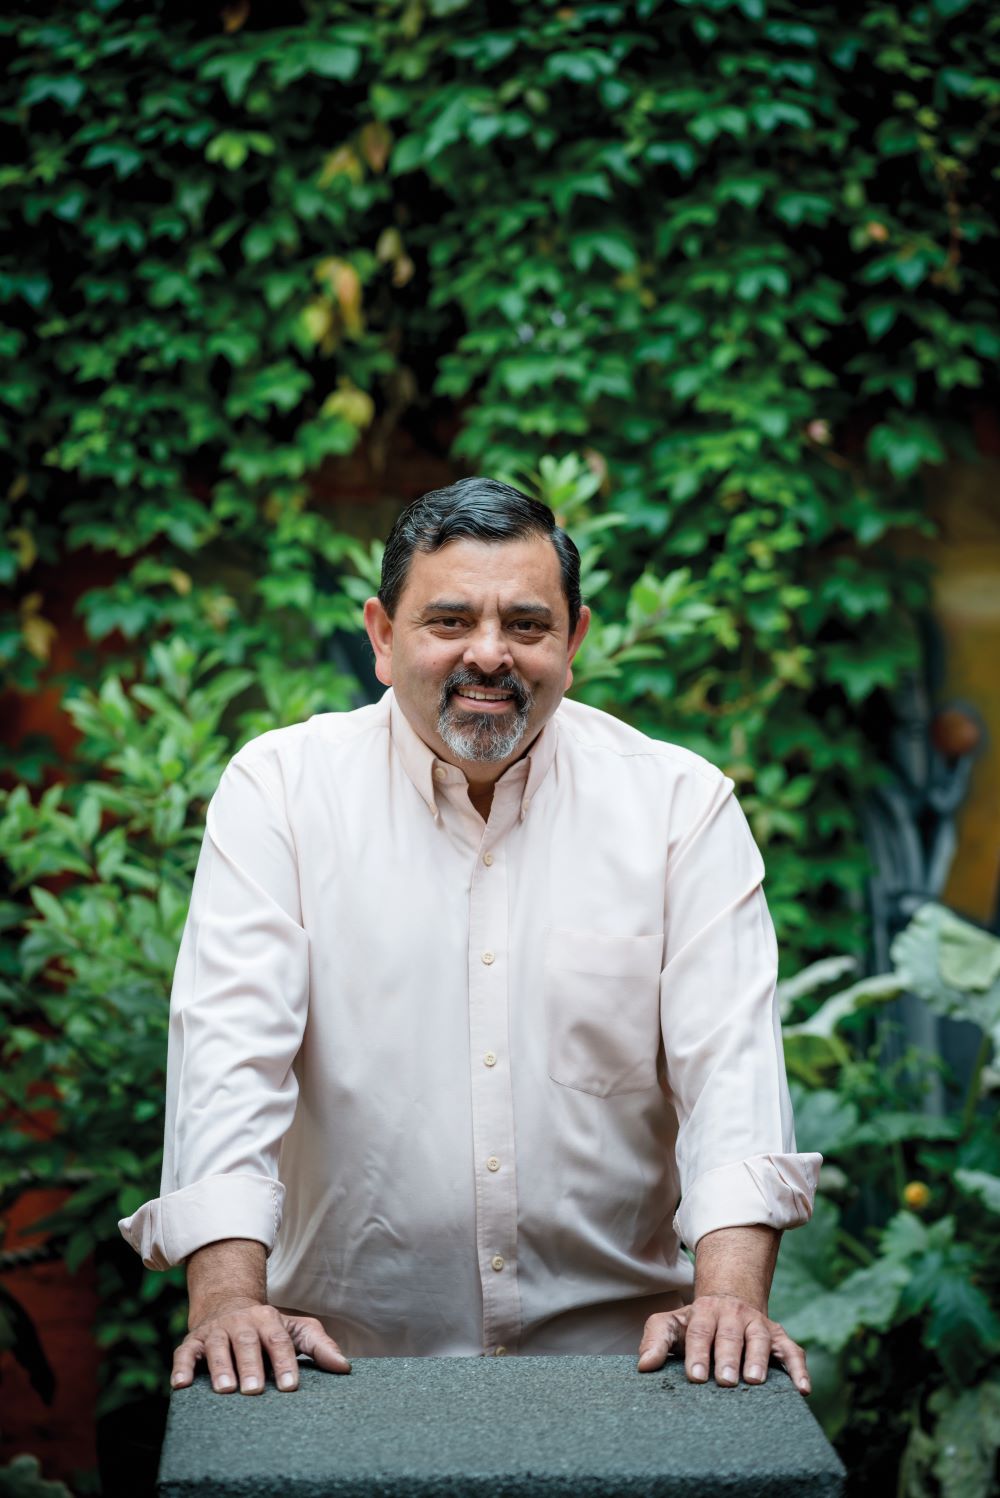 Cyrus Todiwala OBE, DL is a TV chef and owner of the award-winning Café Spice Namasté restaurant in London.